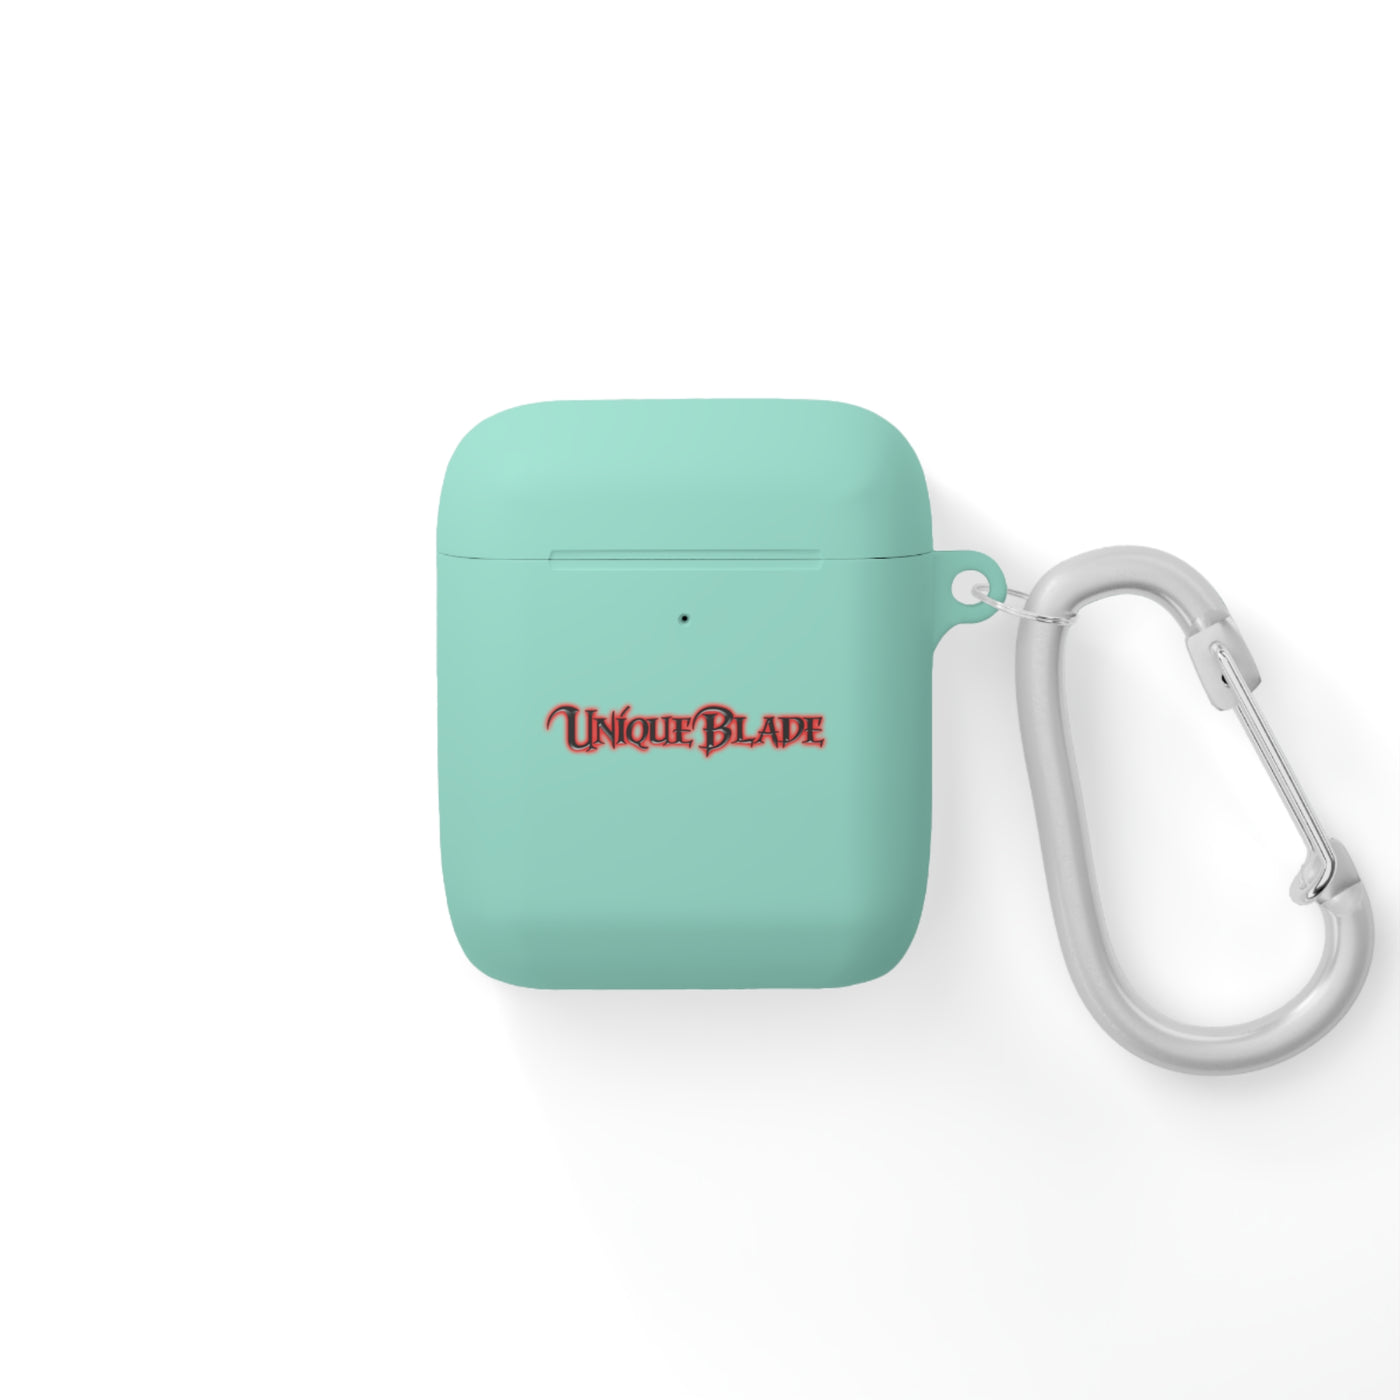 AirPods and AirPods Pro Case Cover - Protective and stylish cover designed specifically for Apple AirPods and AirPods Pro, safeguarding the charging case while adding a touch of personal style.